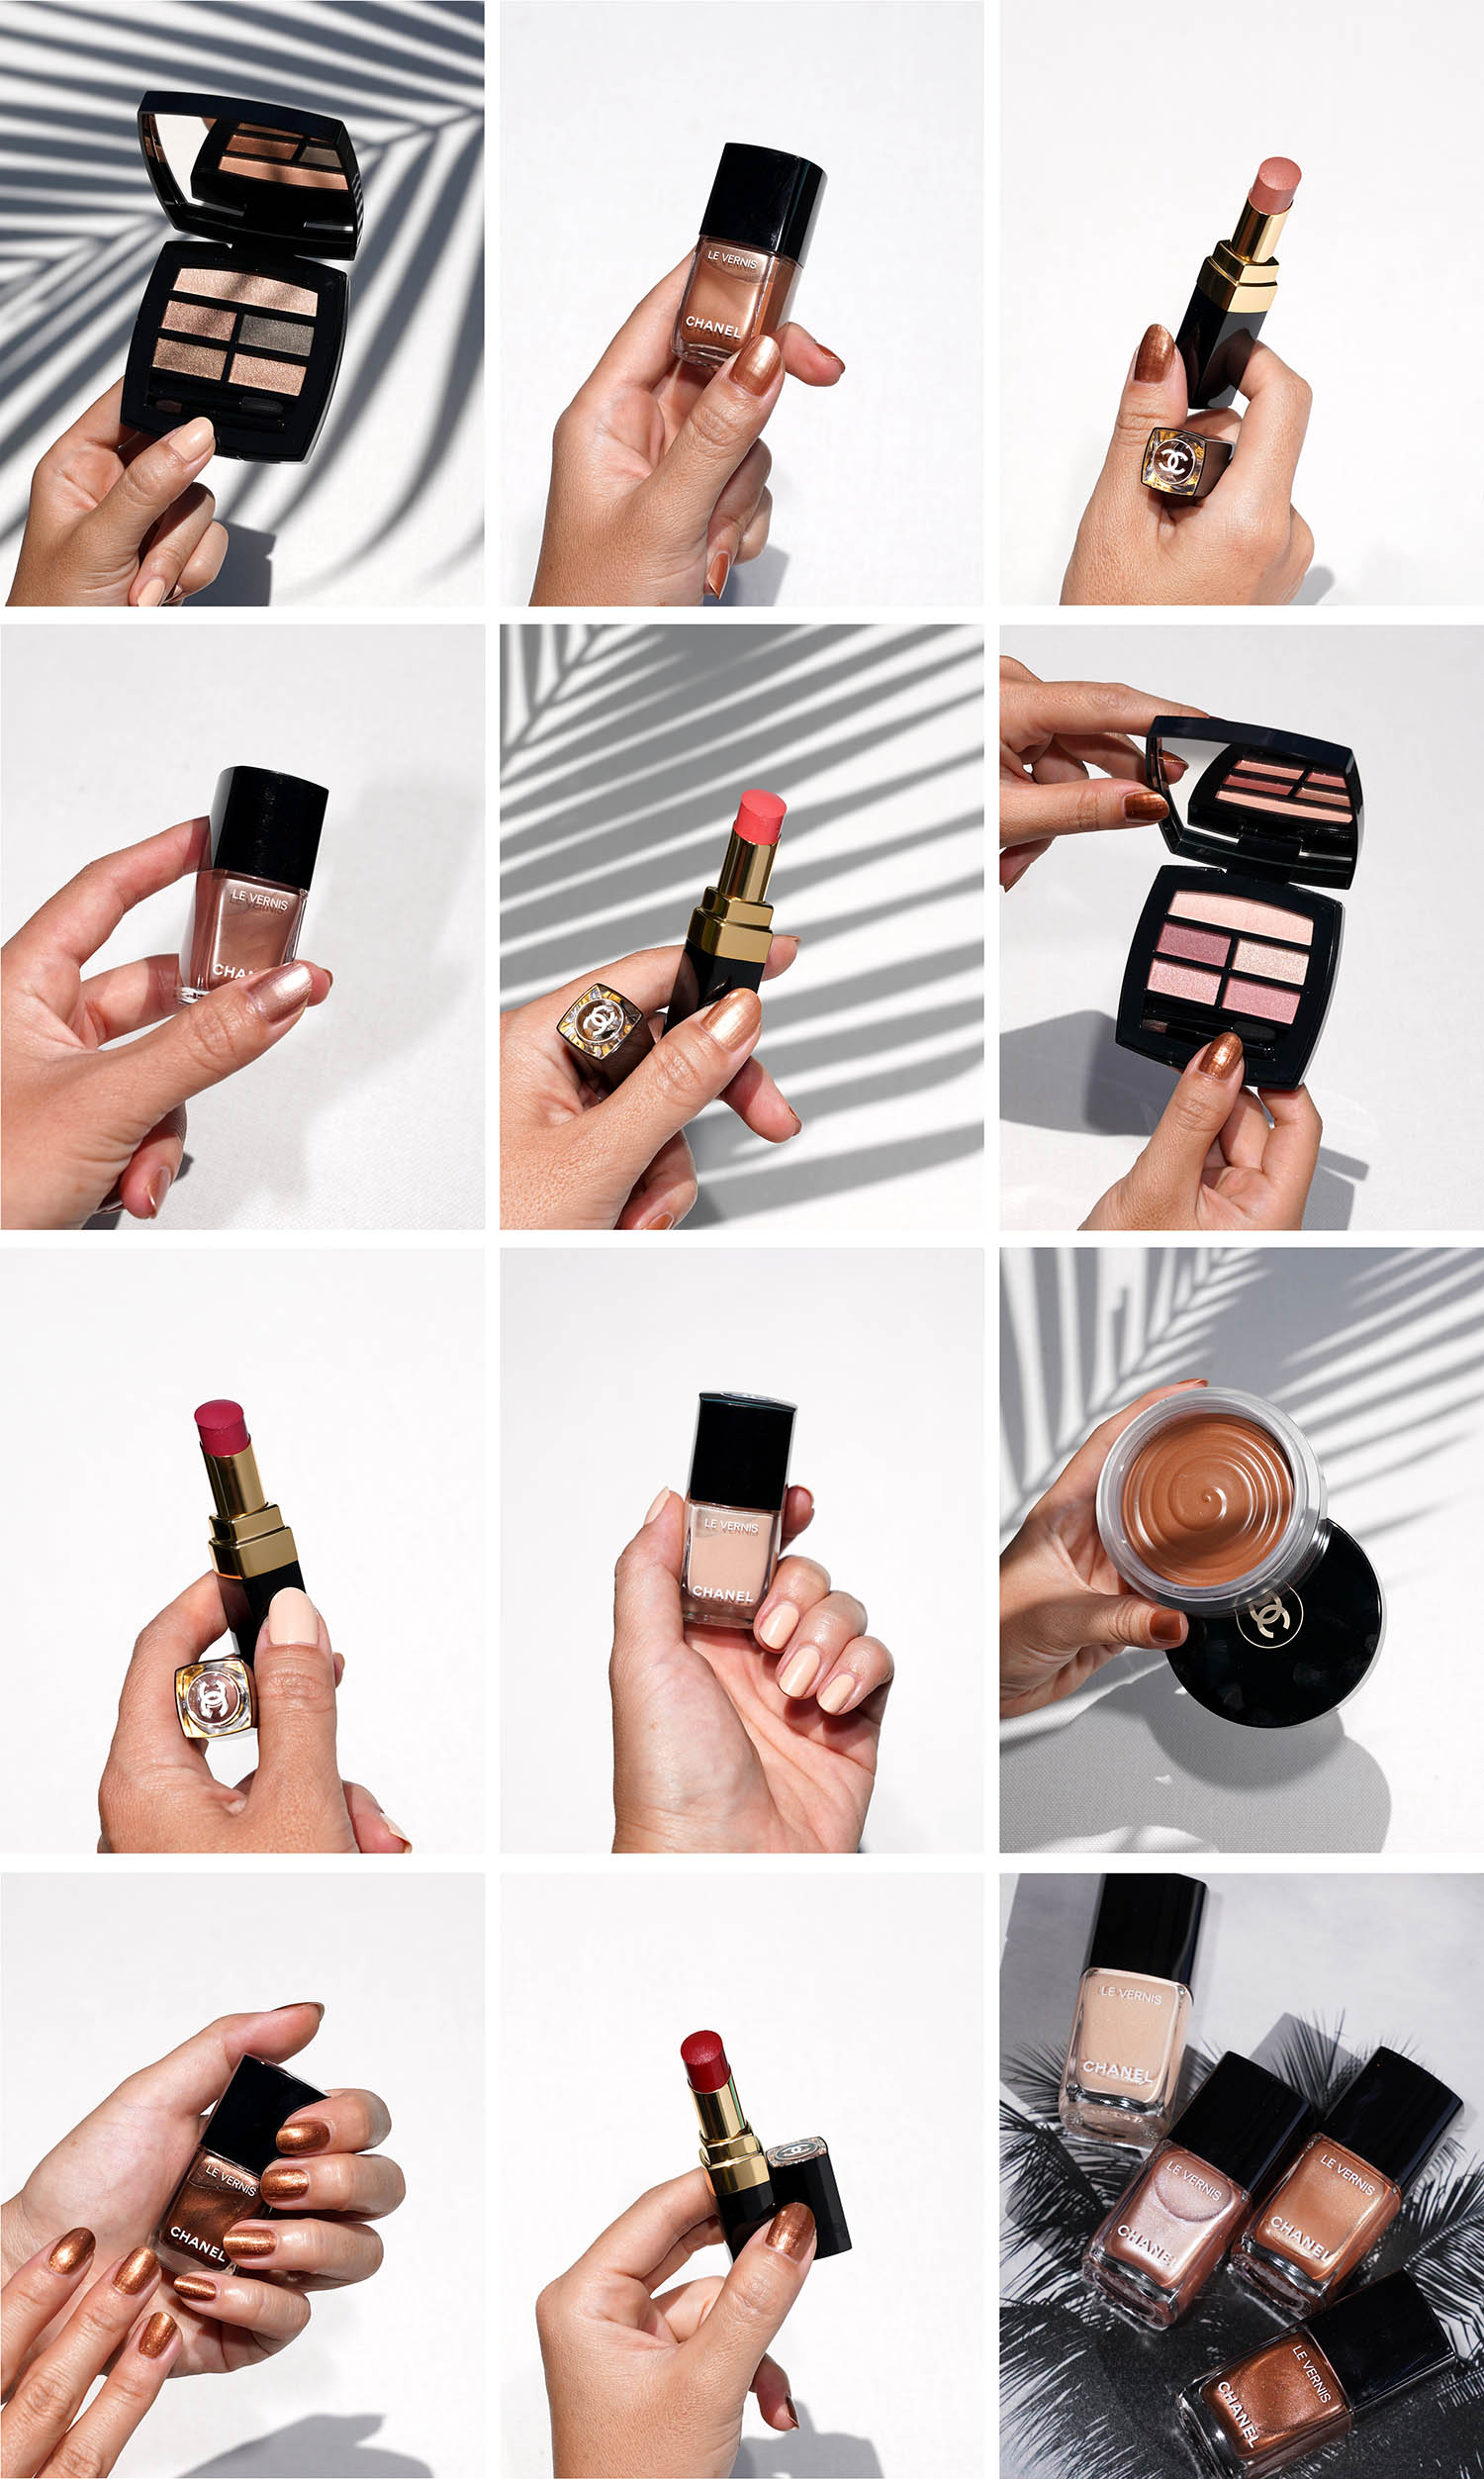 Chanel Les Beiges Summer Light 2021 - The Beauty Look Book